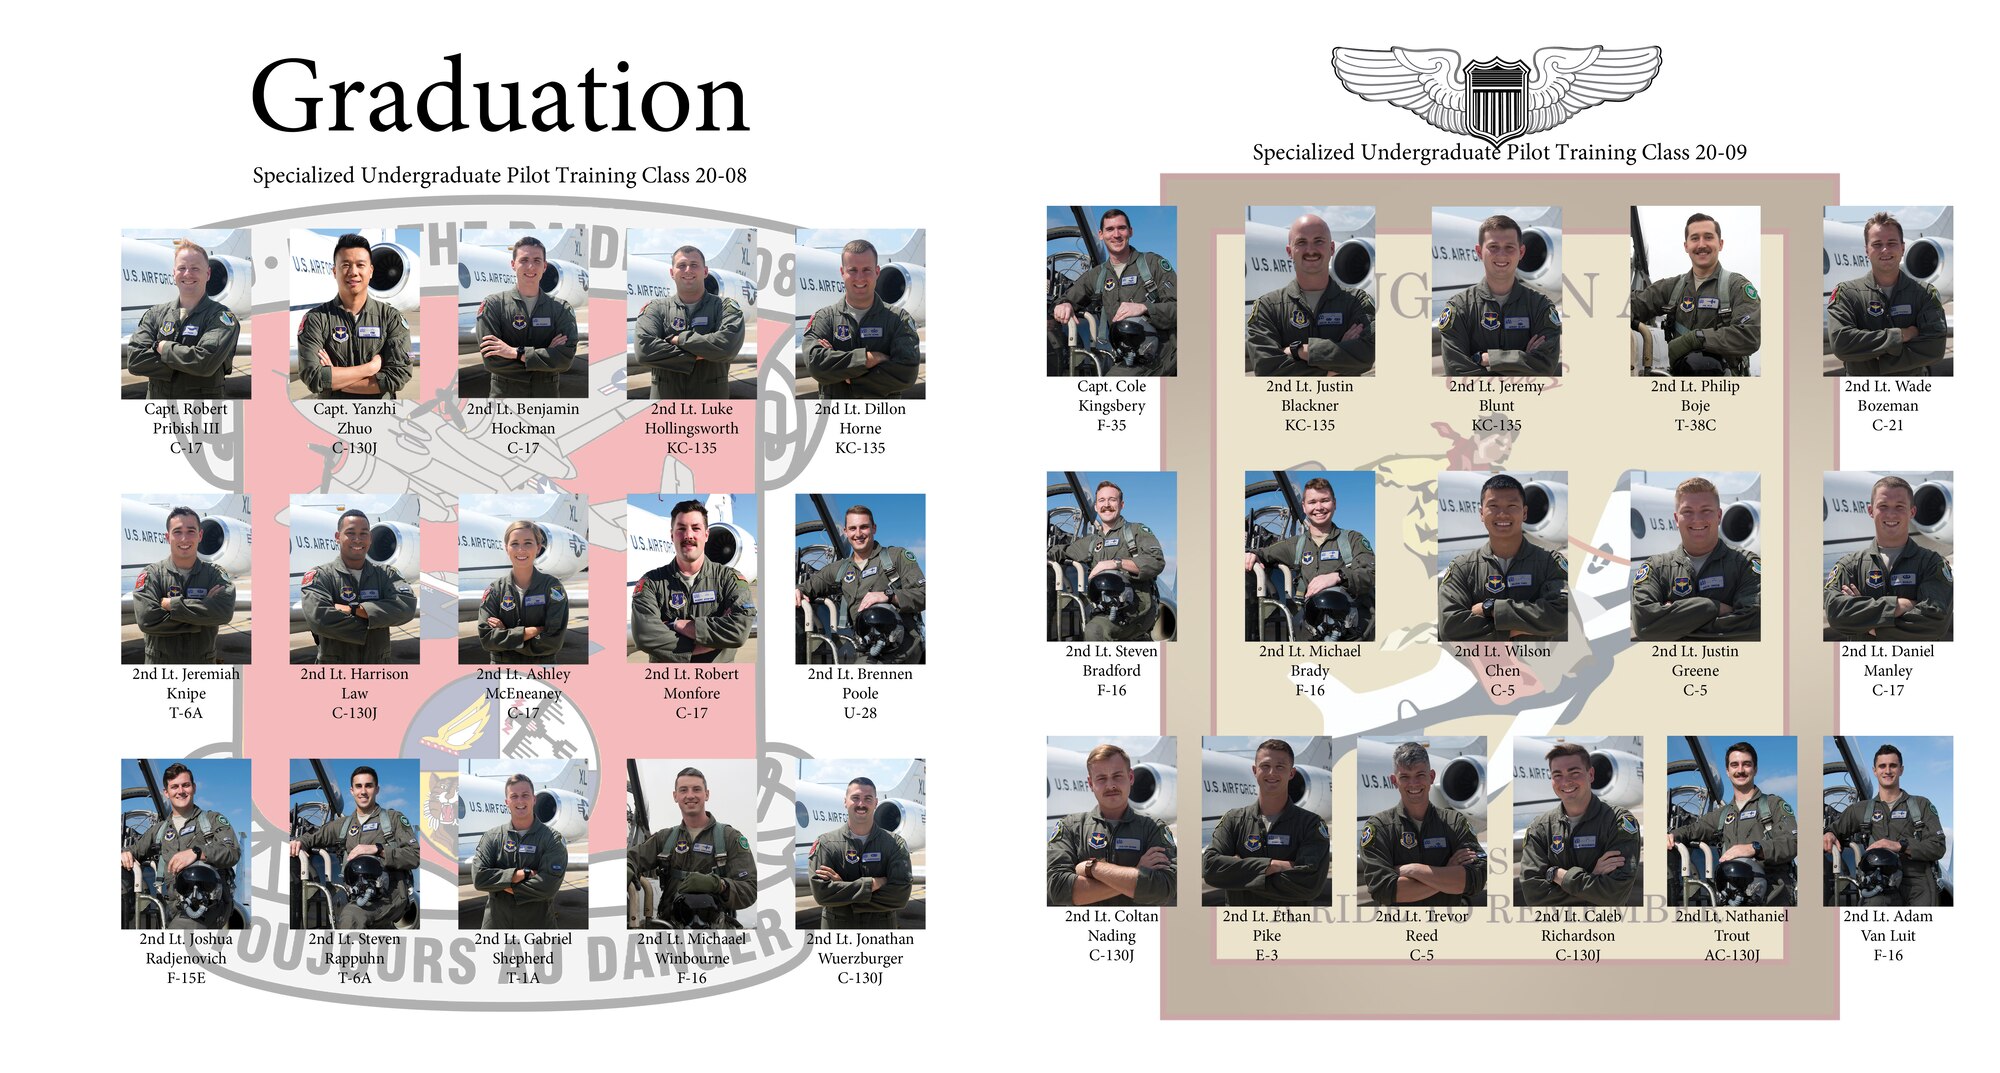 All Laughlin members are invited to attend Specialized Undergraduate Pilot Training Class 20-08 and 20-0’s graduation ceremony at 10 a.m., Feb. 28, 2020, in Anderson Hall, here. (U>S. Air Force graphic by Staff Sgt. Benjamin N. Valmoja)